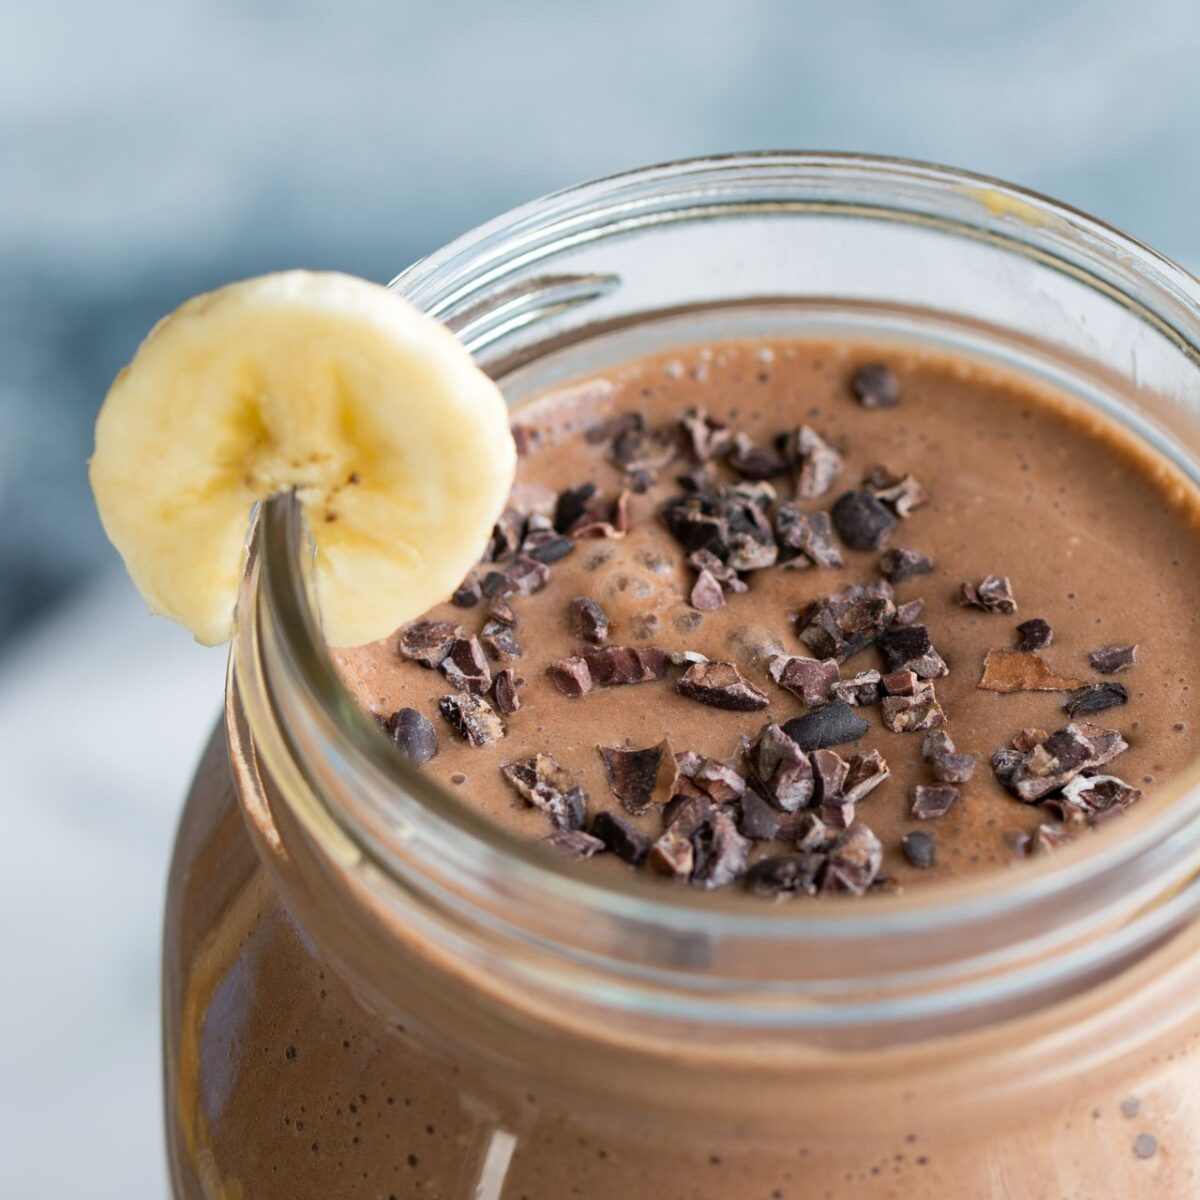 A jar with a peanut butter chocolate smoothie with a slice of banana.